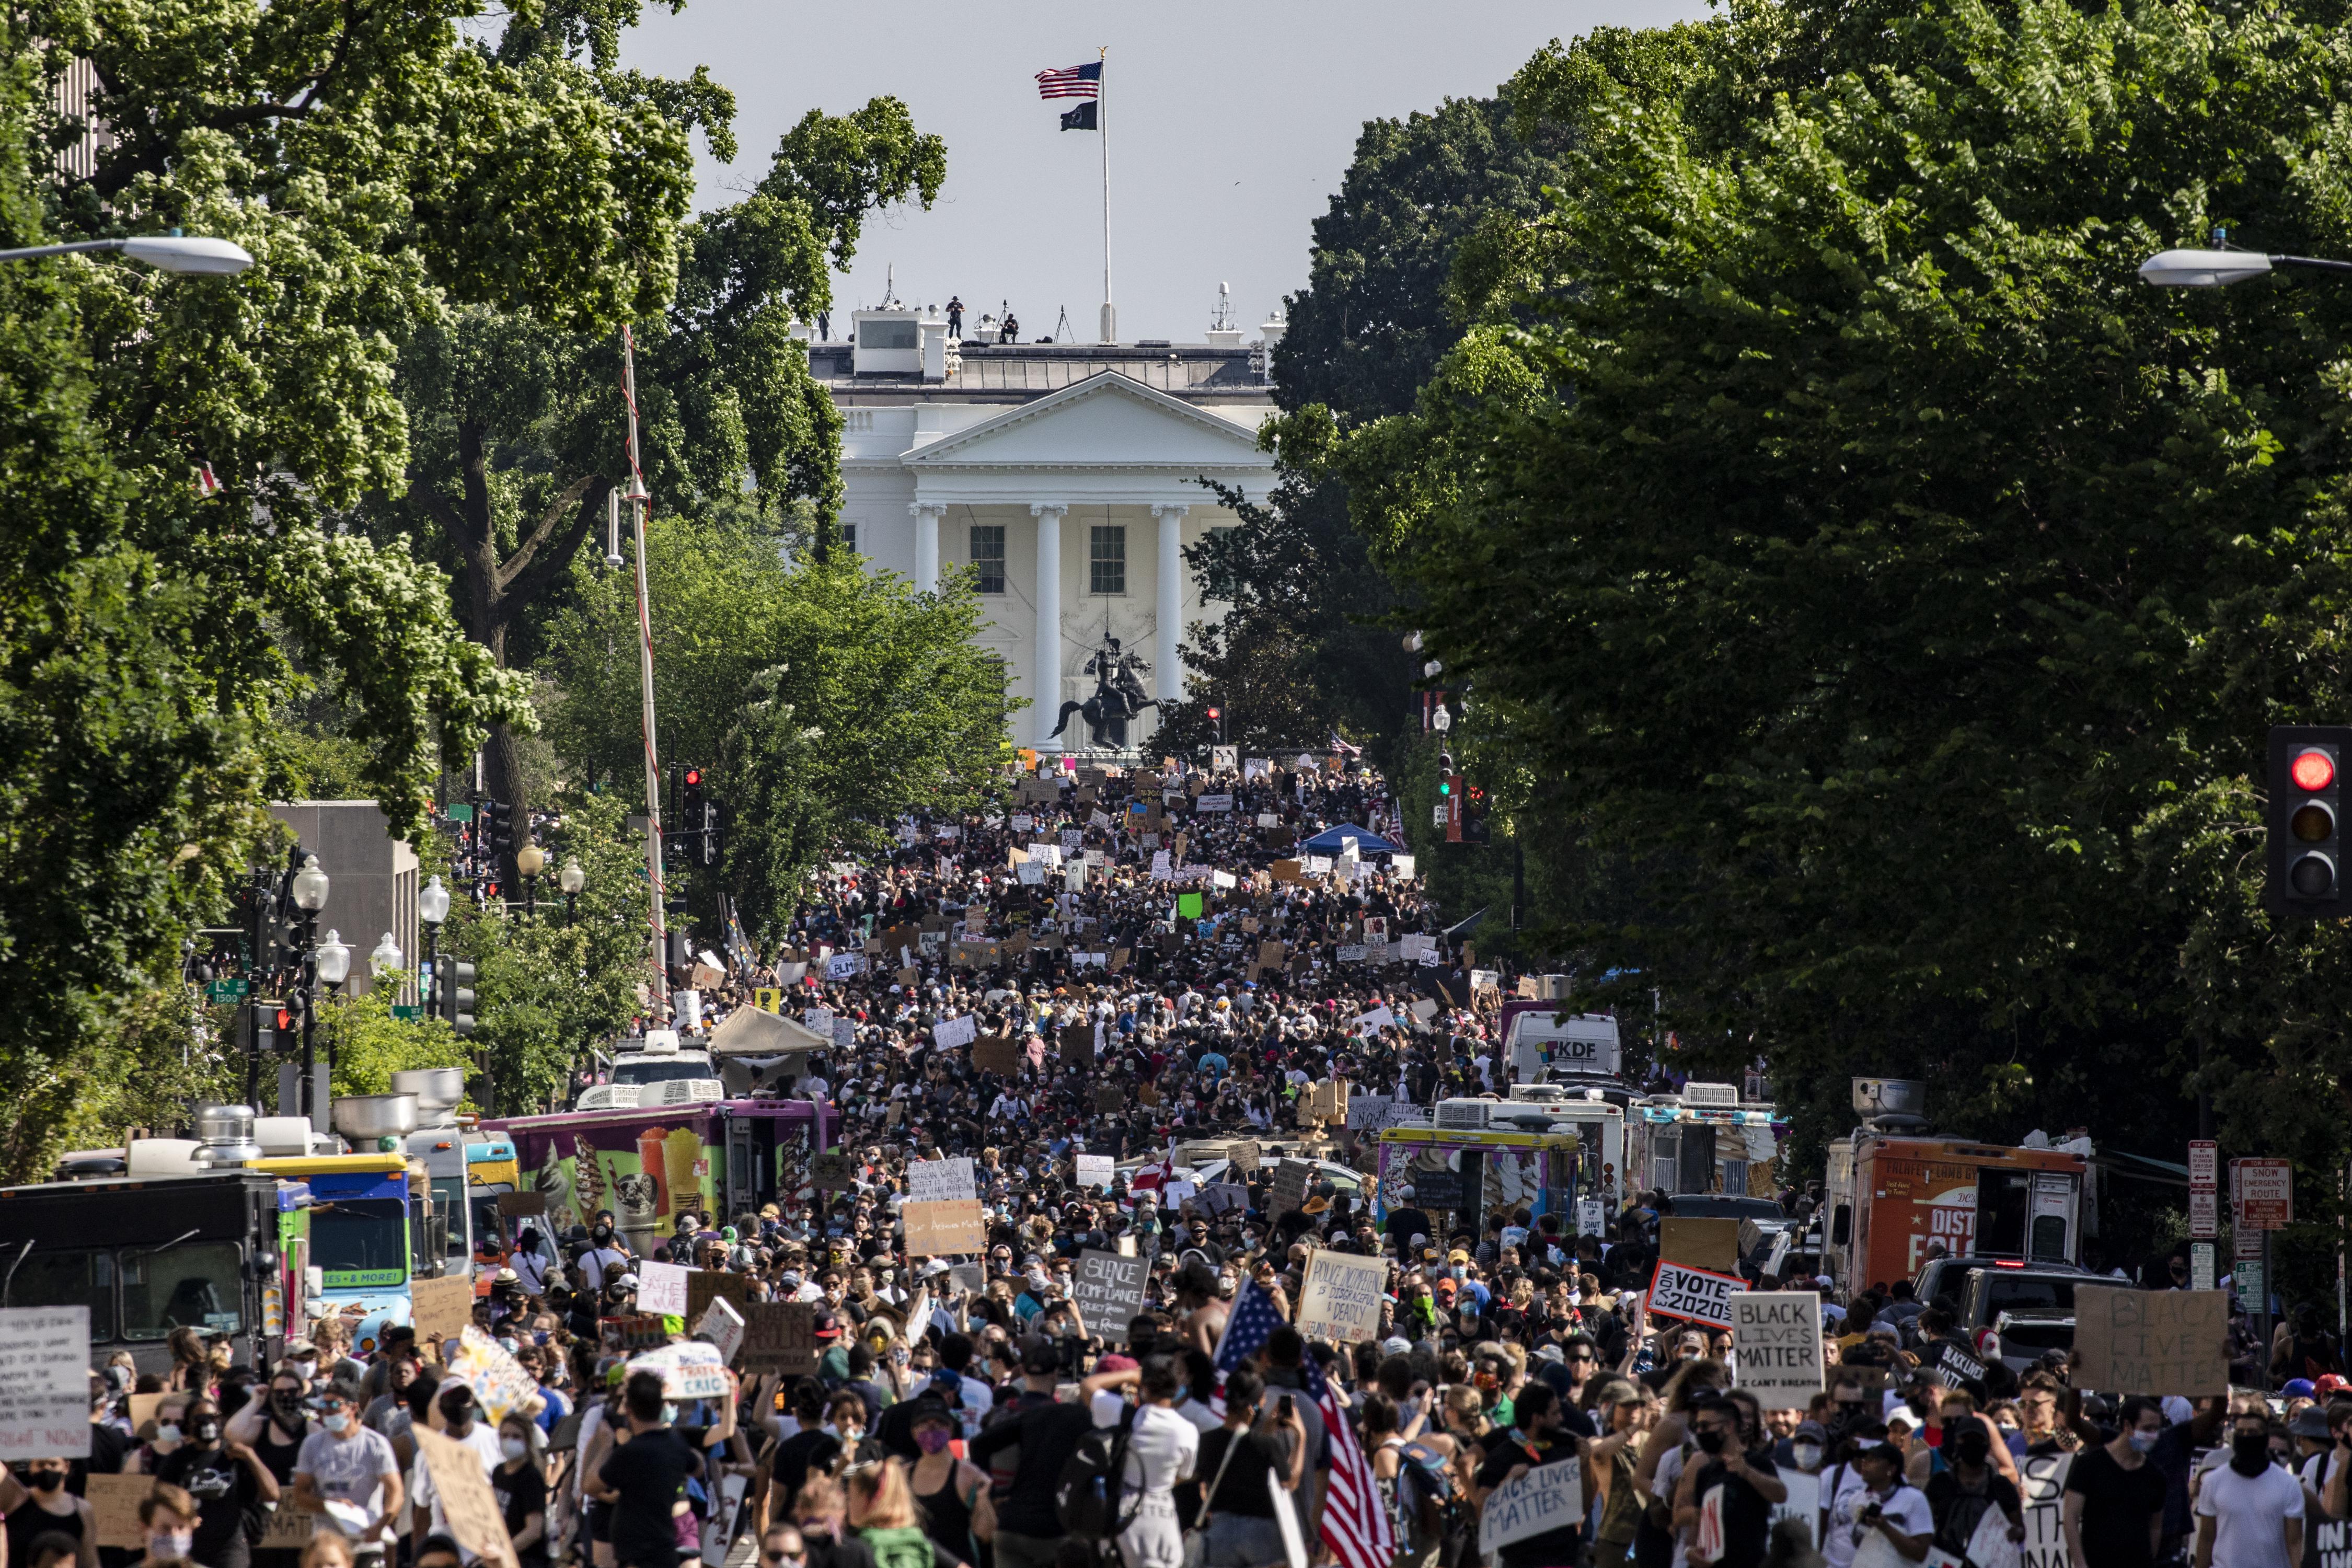 Protesters march in the street, with the White House in the background